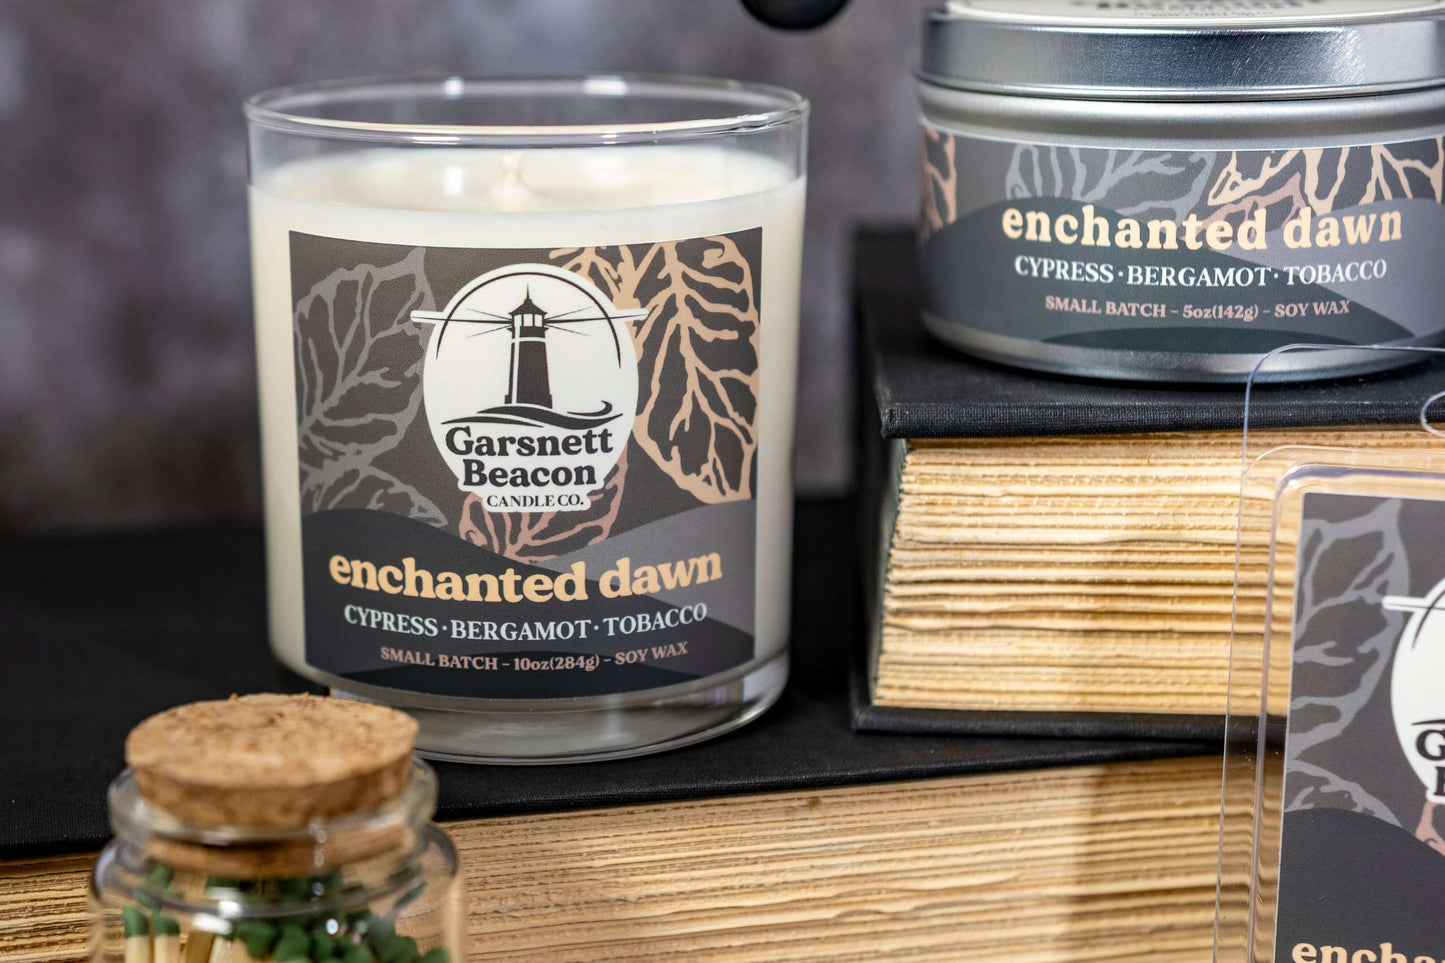 Cypress Bergamot Saffron Flower Patchoili scented candles called Enchanted Dawn in glass ceramic tin and wax melts